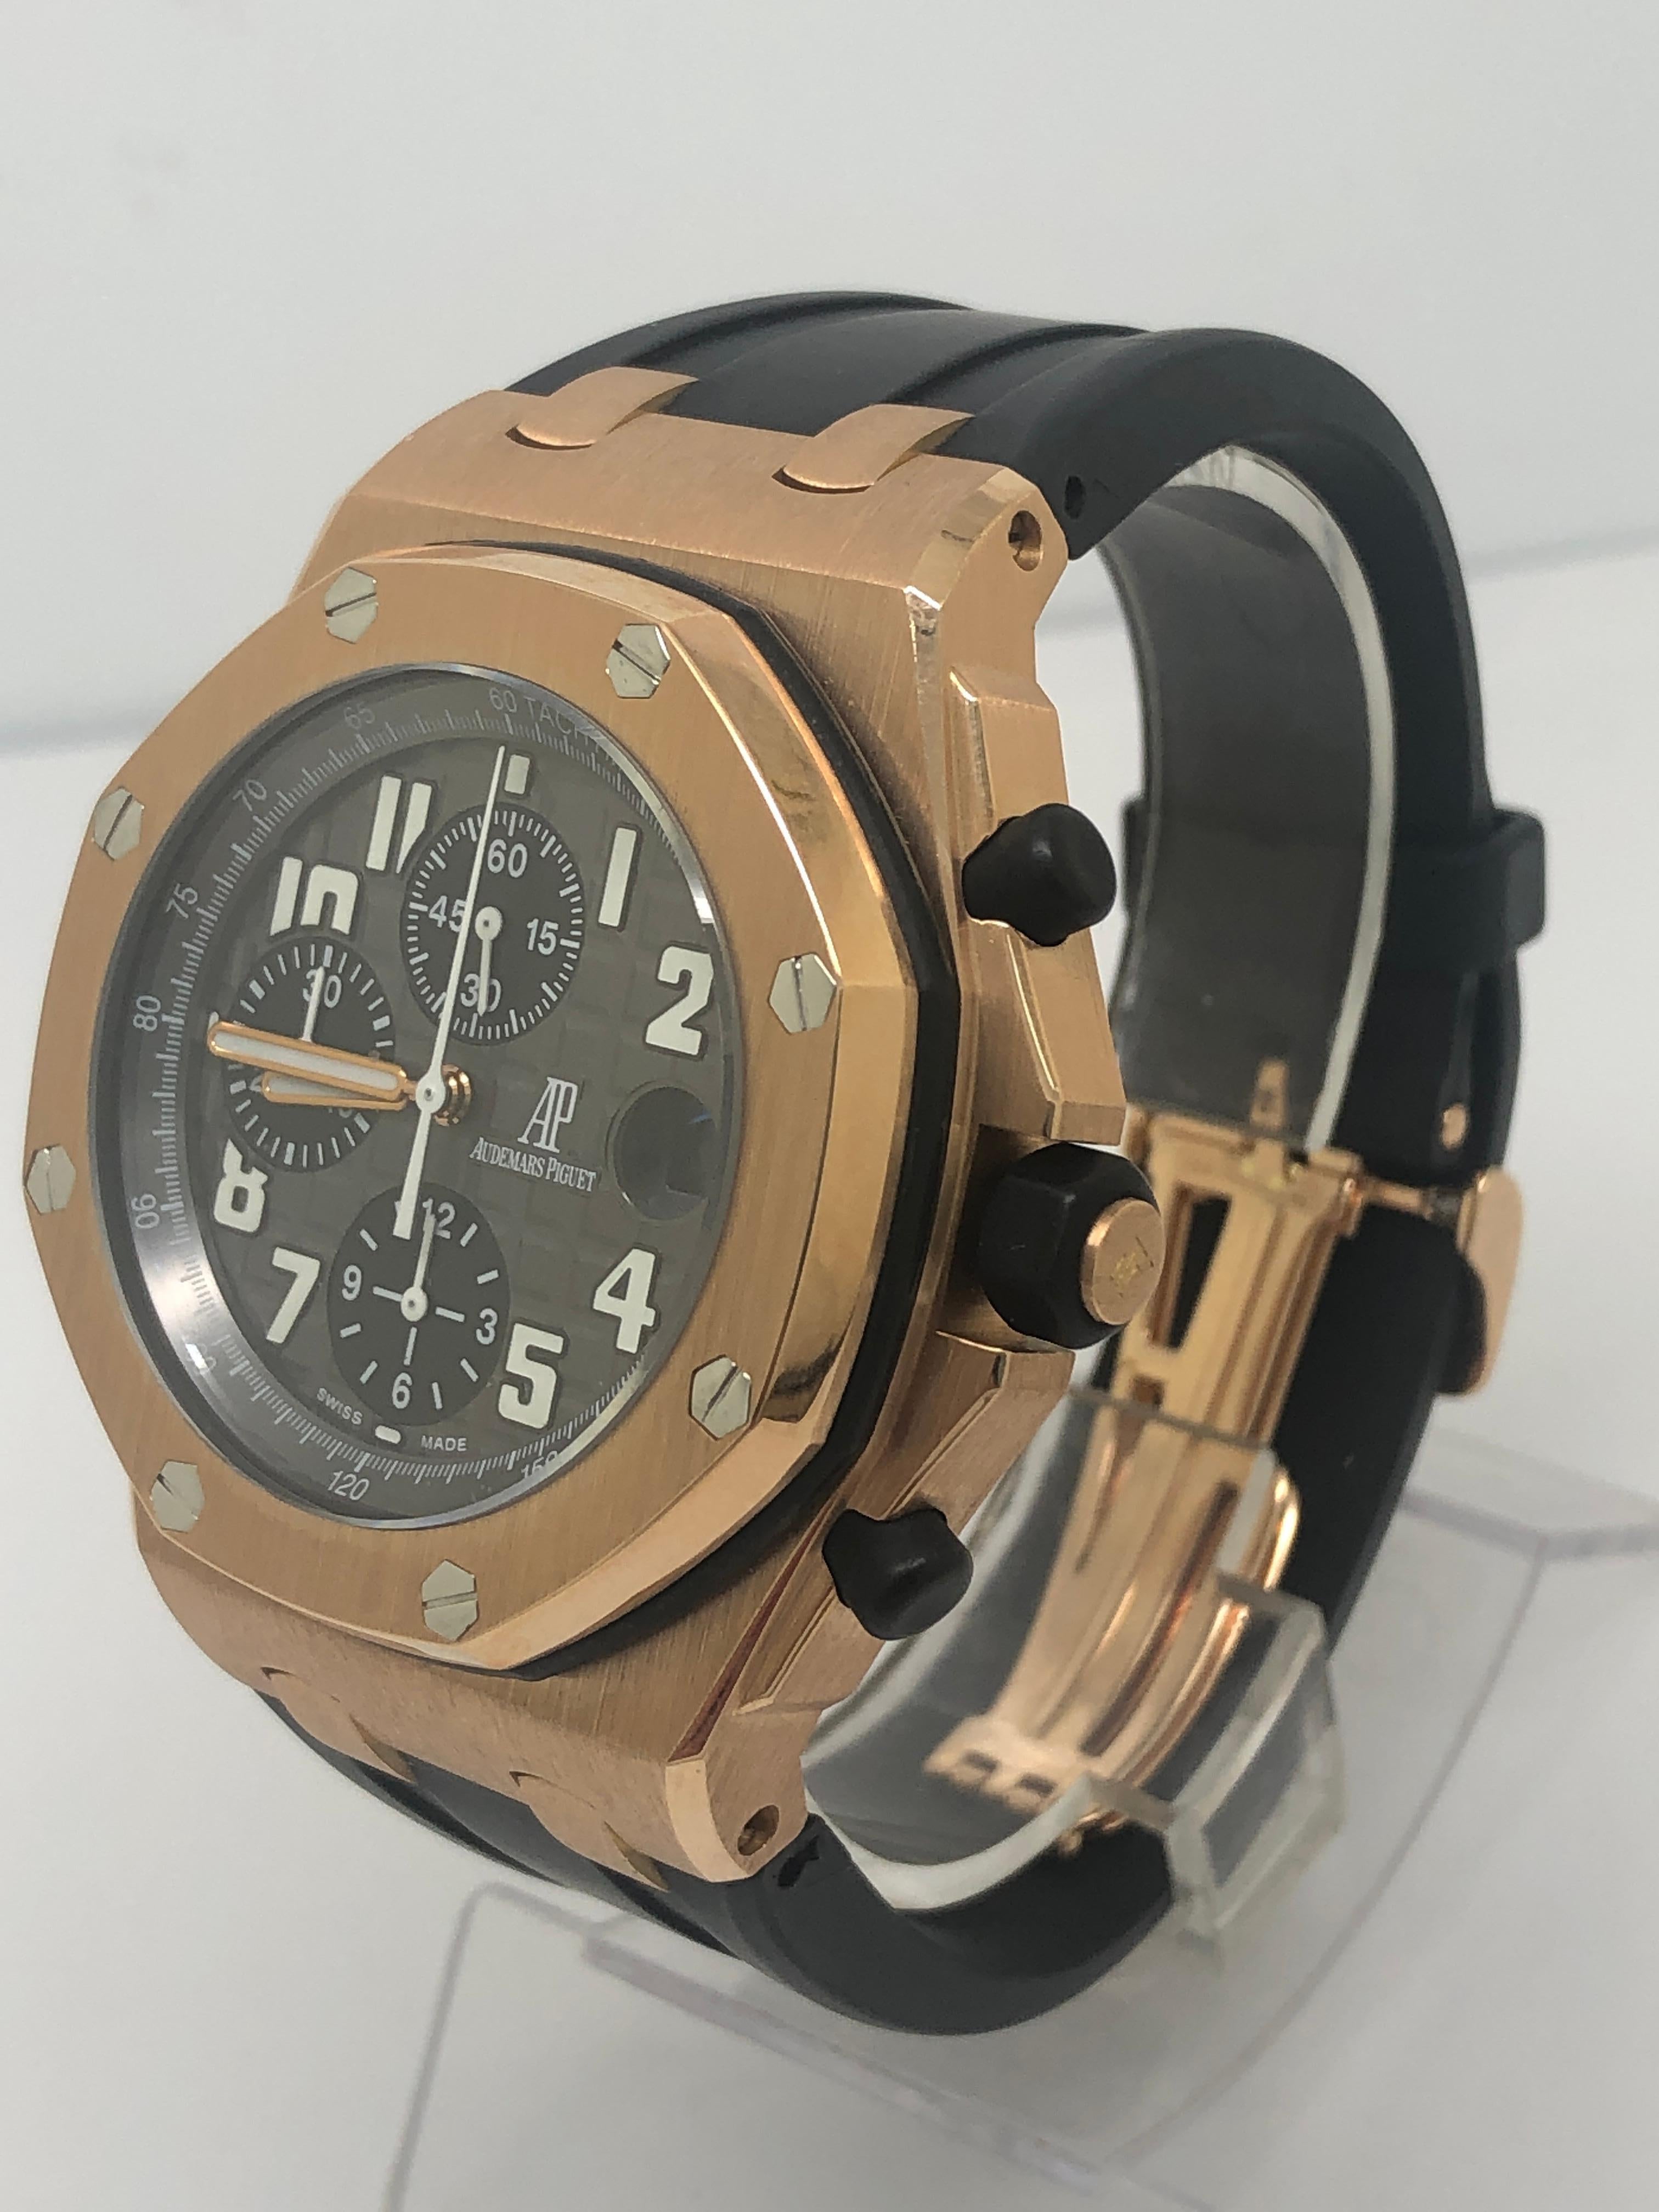 Audemars Piguet 42mm Rose Gold Offshore Watch

all original parts

year approx 2009

excellent condition


